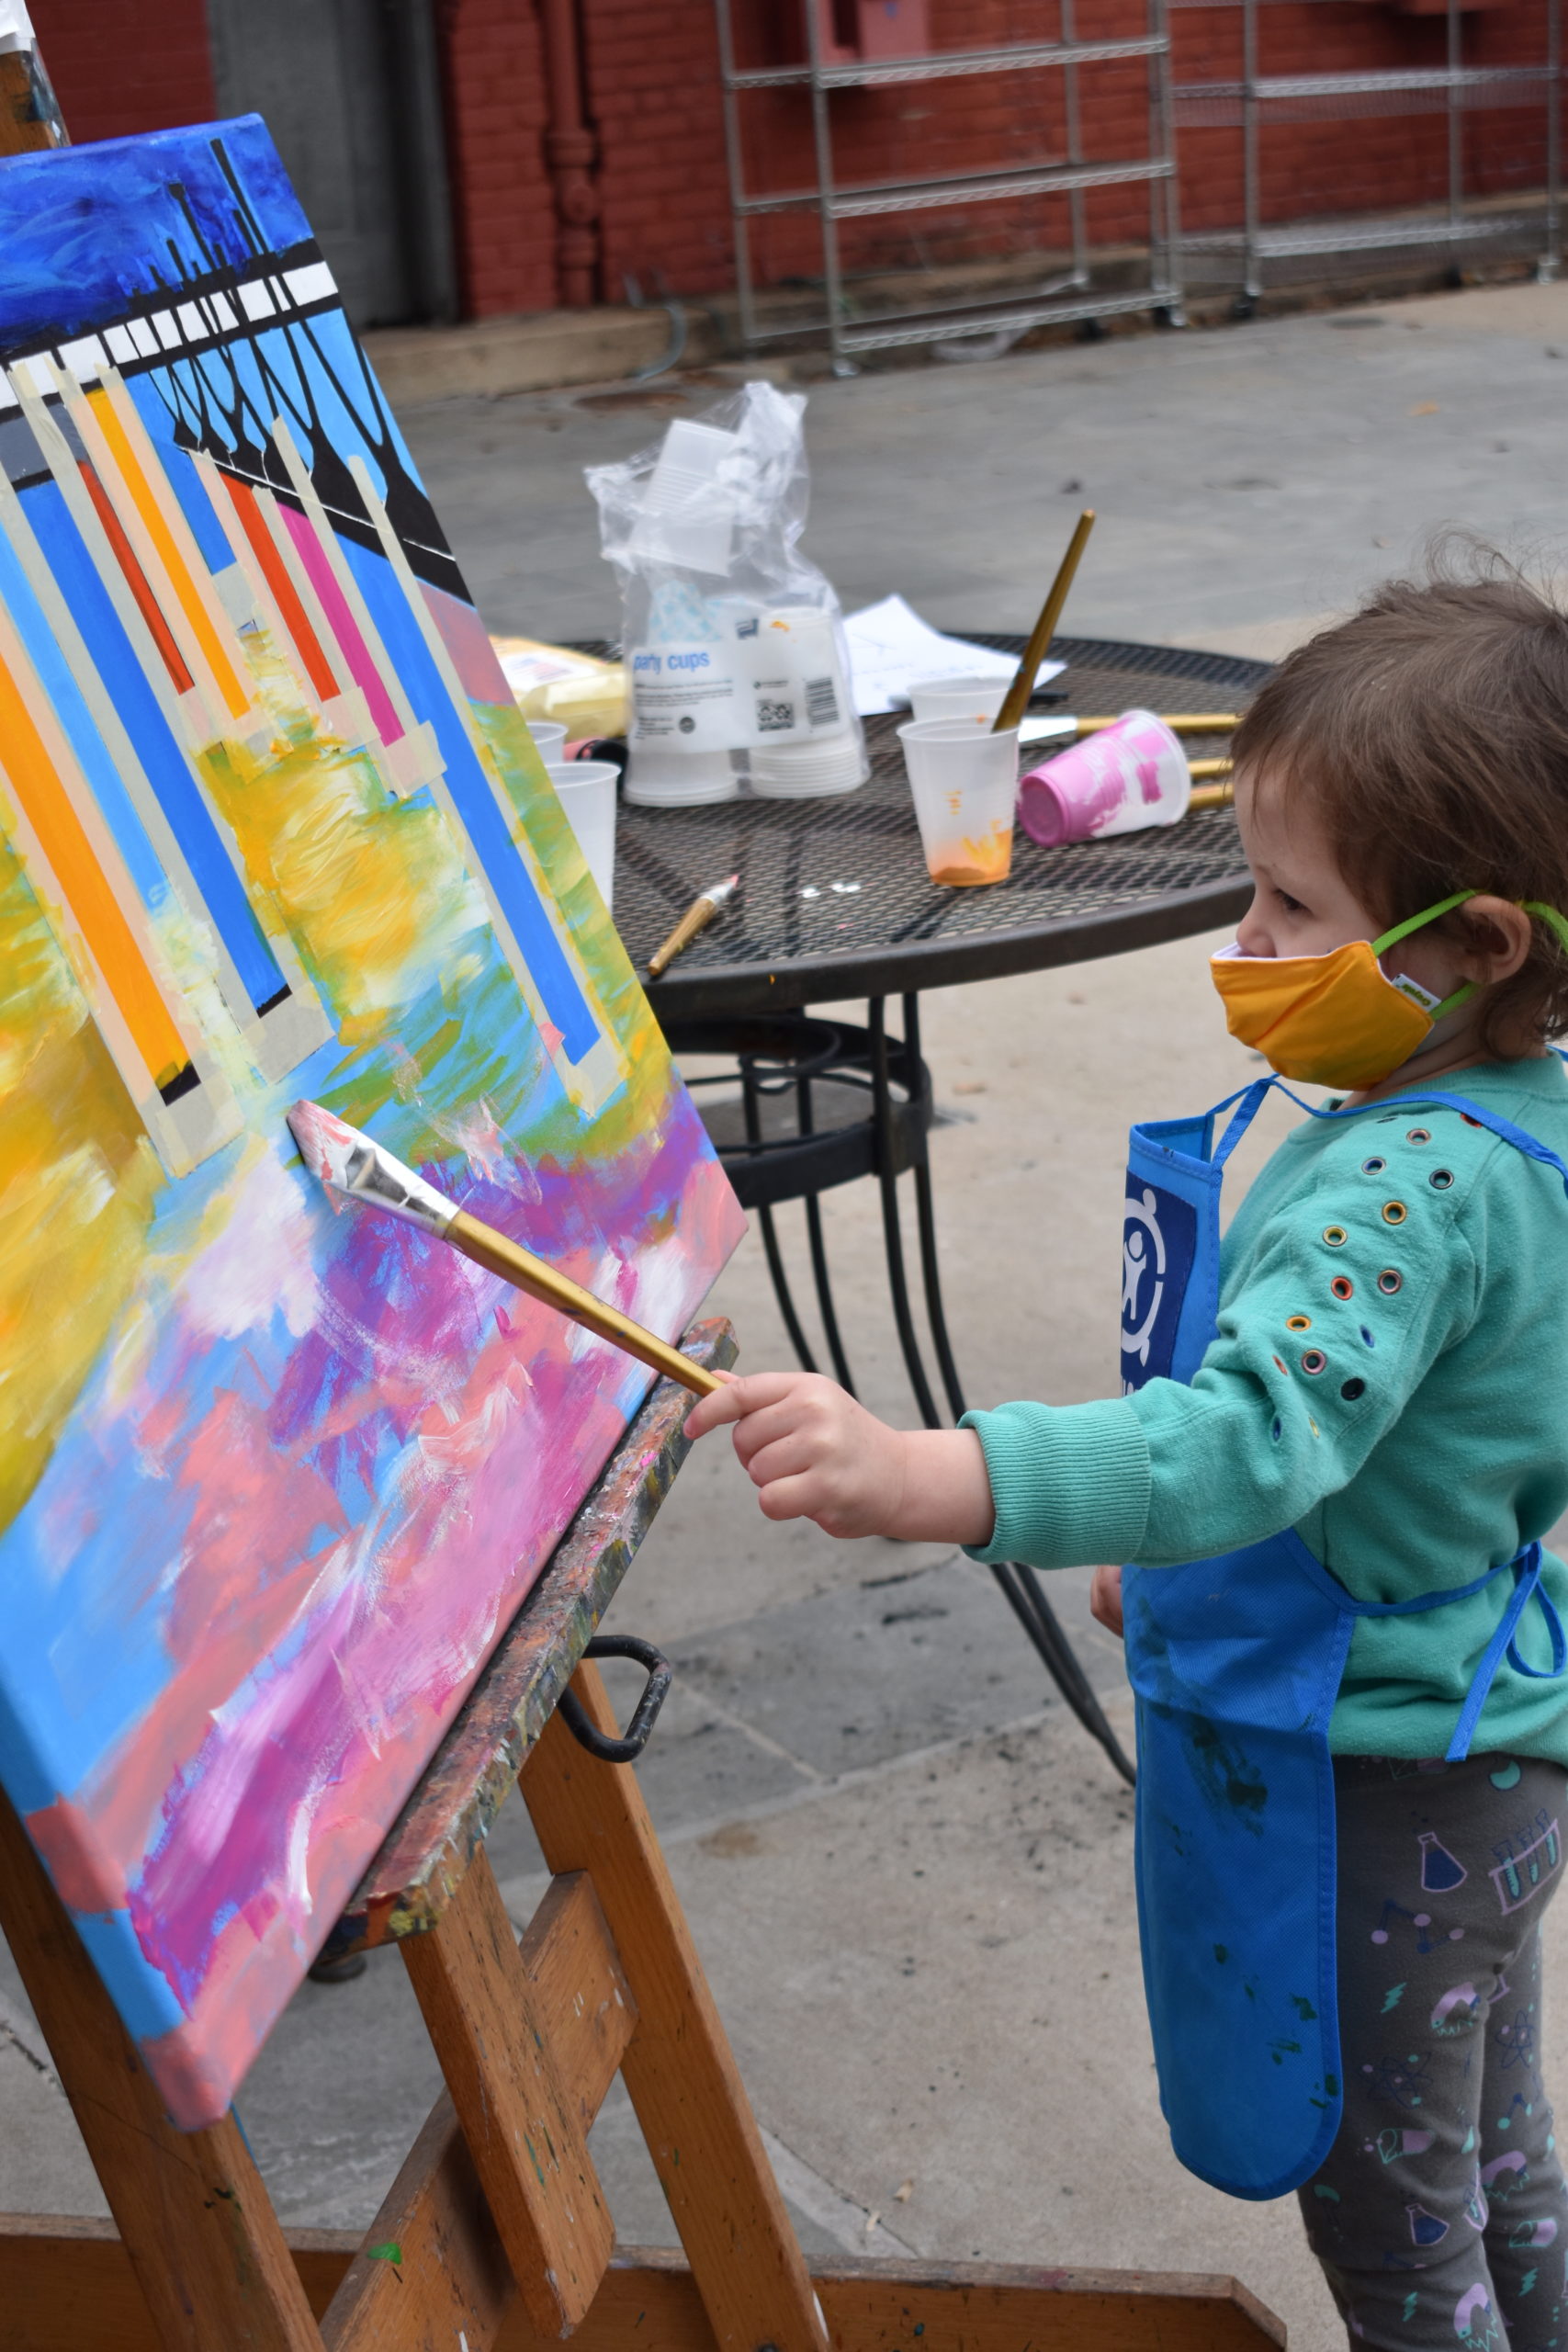 A girl holding a paint brush and painting on a large canvas